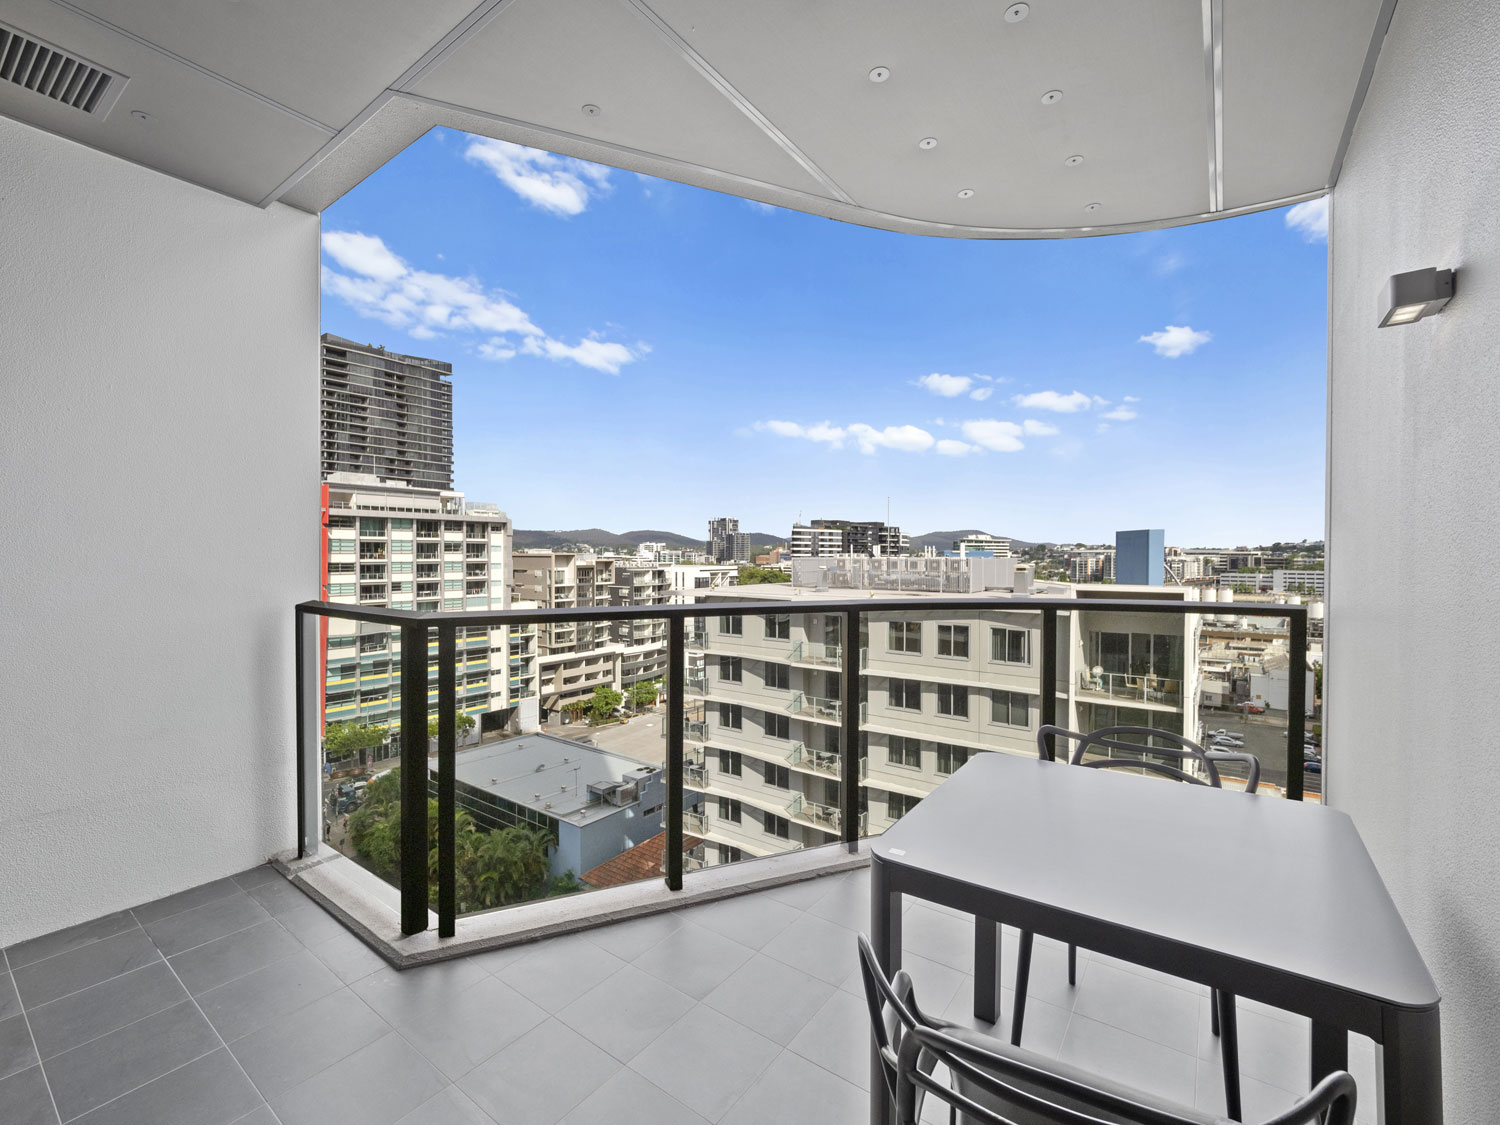 Apartment photography for Lucid Living, South Brisbane